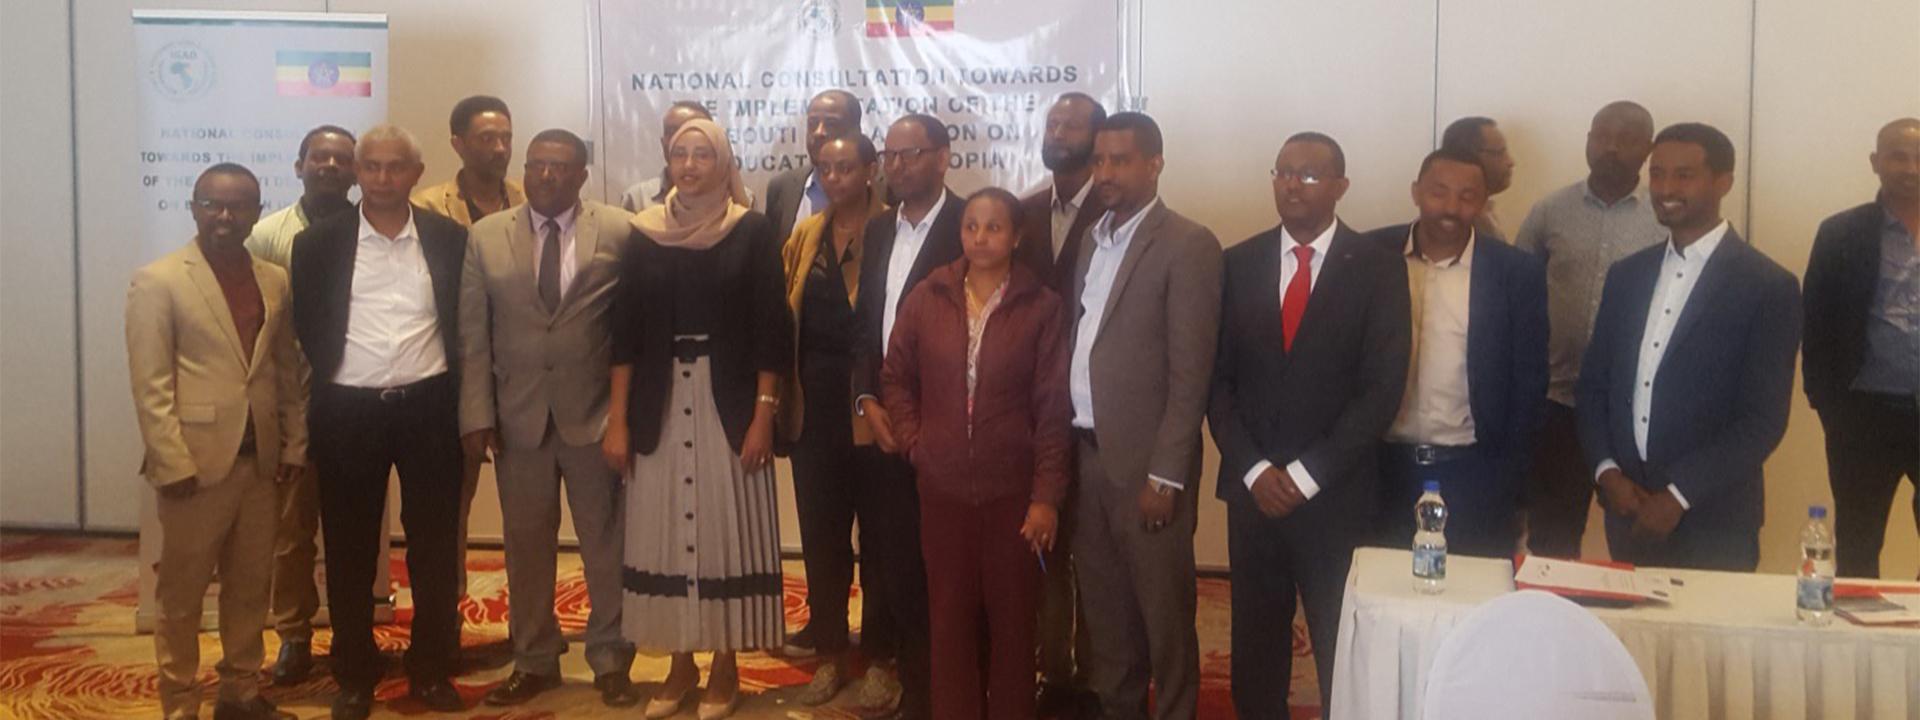 IGAD opens Ethiopia’s National Consultation meeting on the Implementation of the Djibouti Declaration on Education